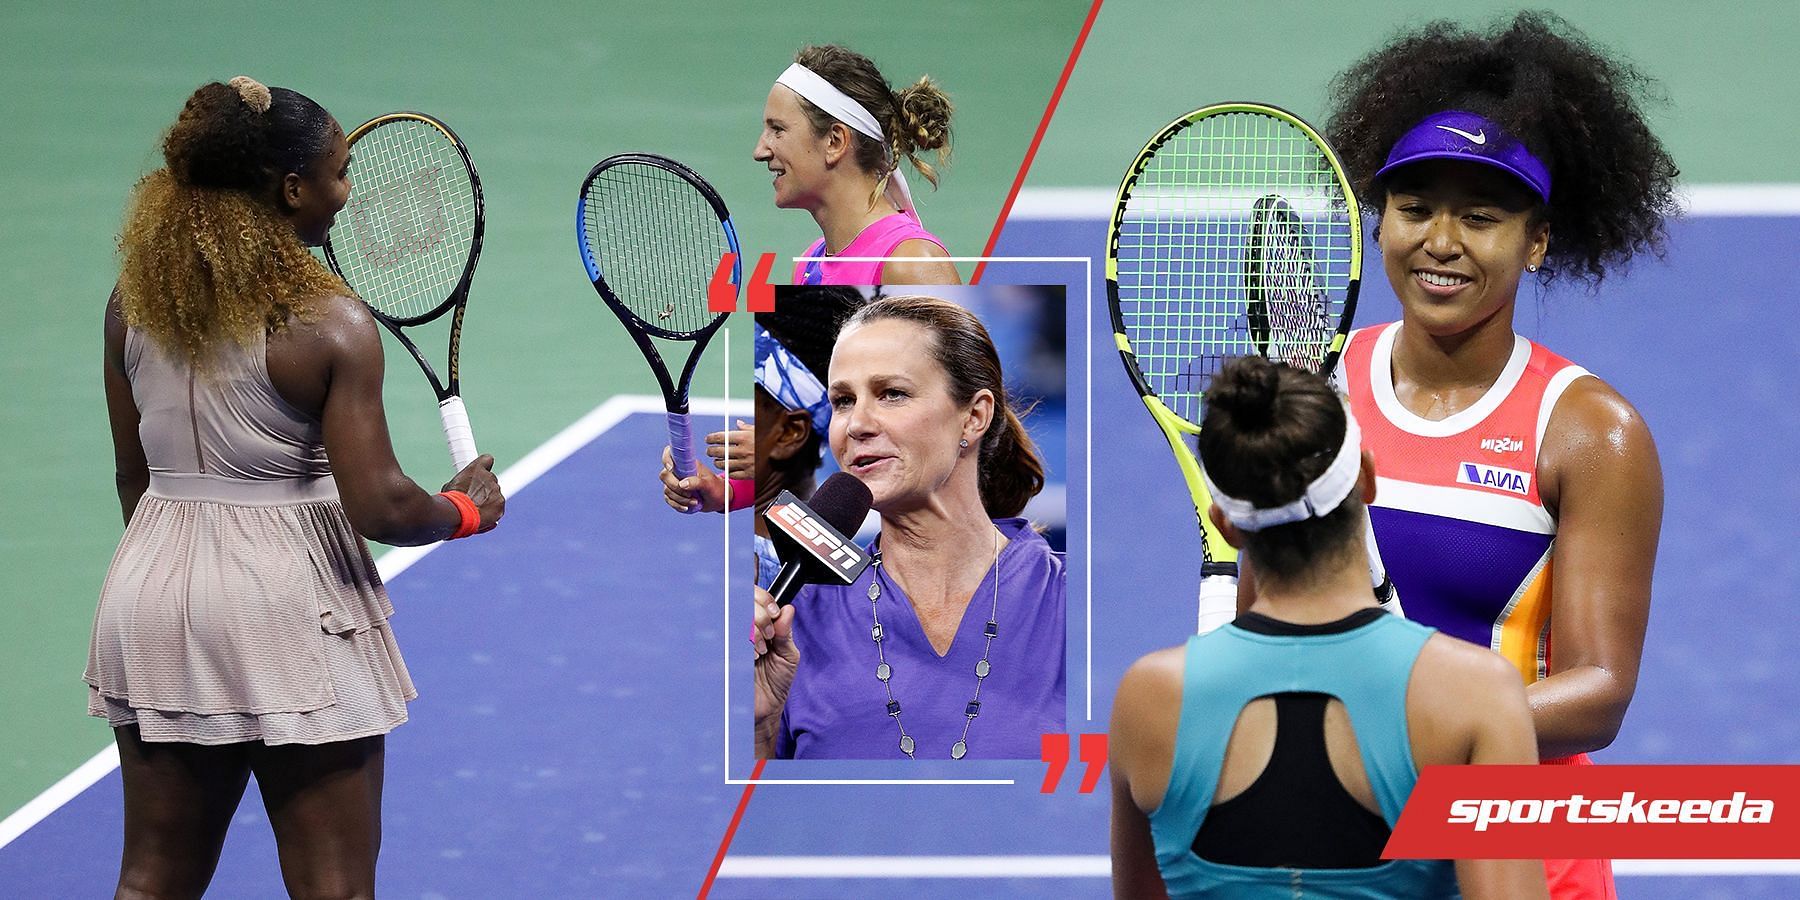 Pam Shriver opines on some of the greatest matches at Arthur Ashe Stadium